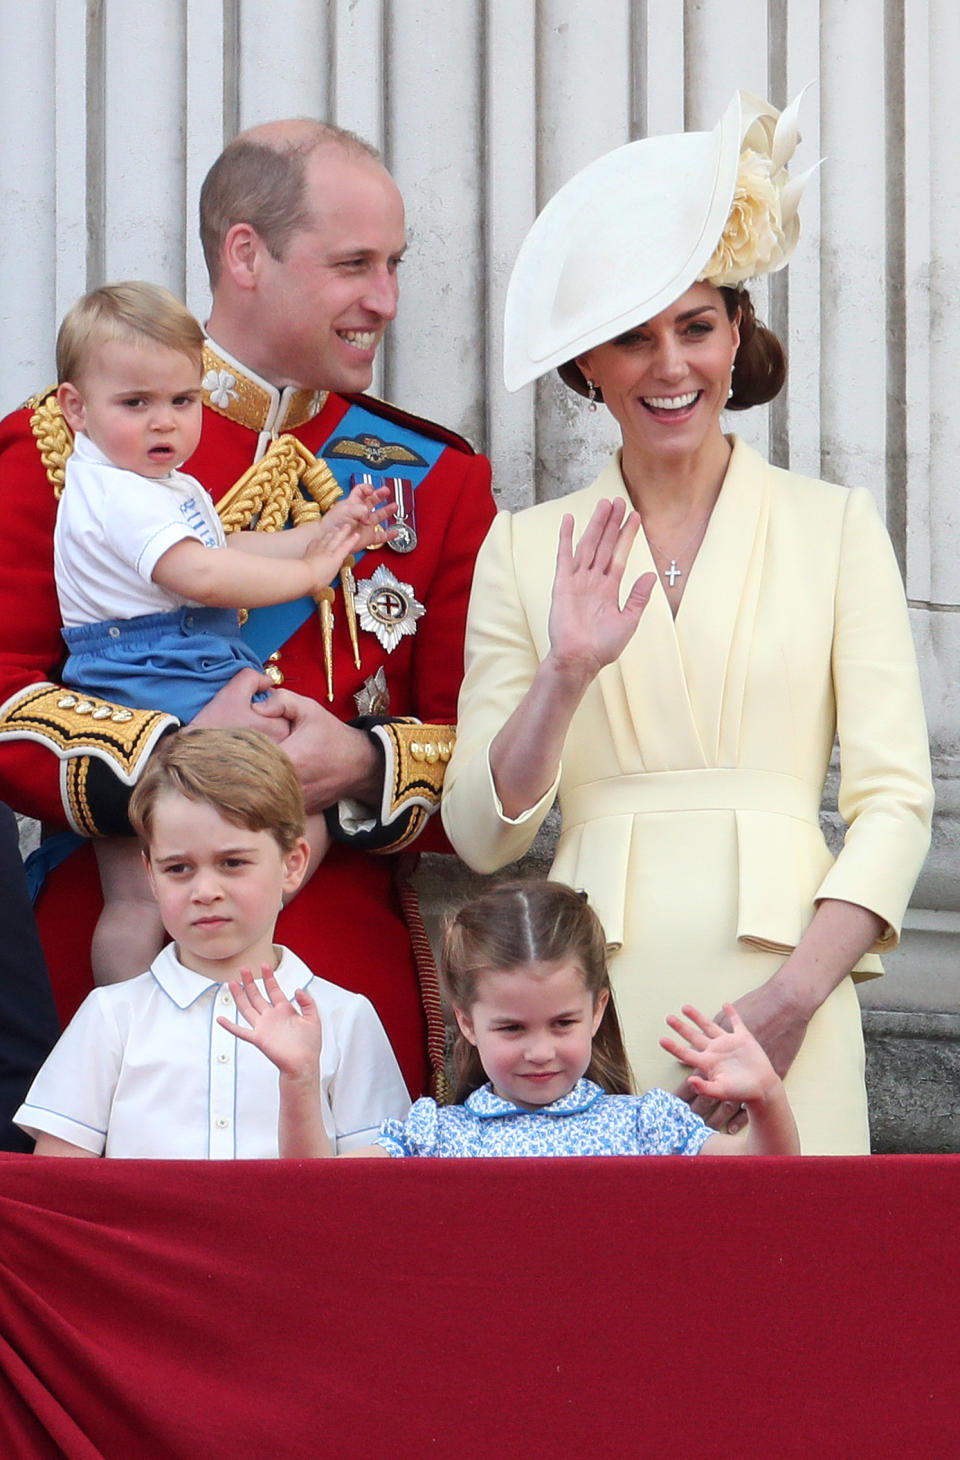 June 2019: Prince Louis makes his Trooping the Colour debut